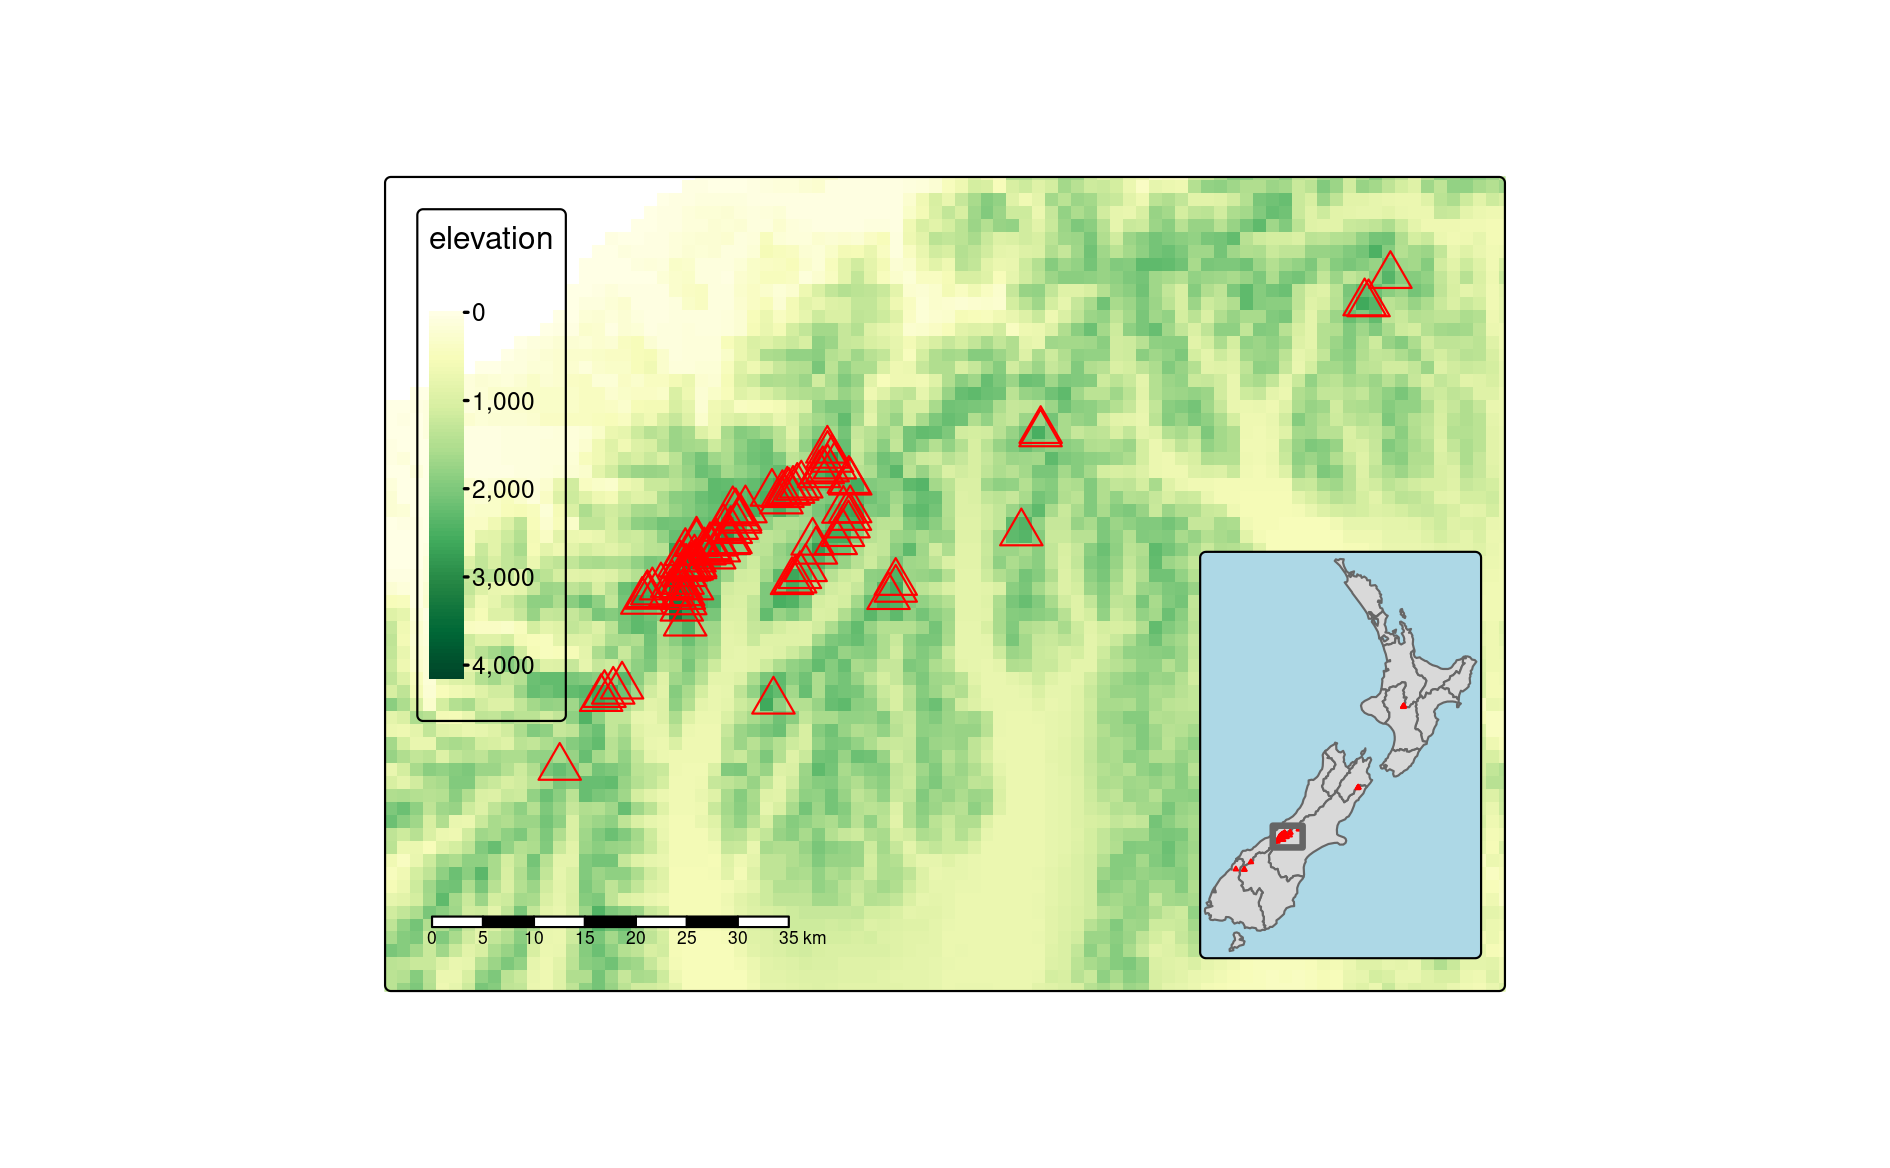 Inset map providing a context - location of the central part of the Southern Alps in New Zealand.